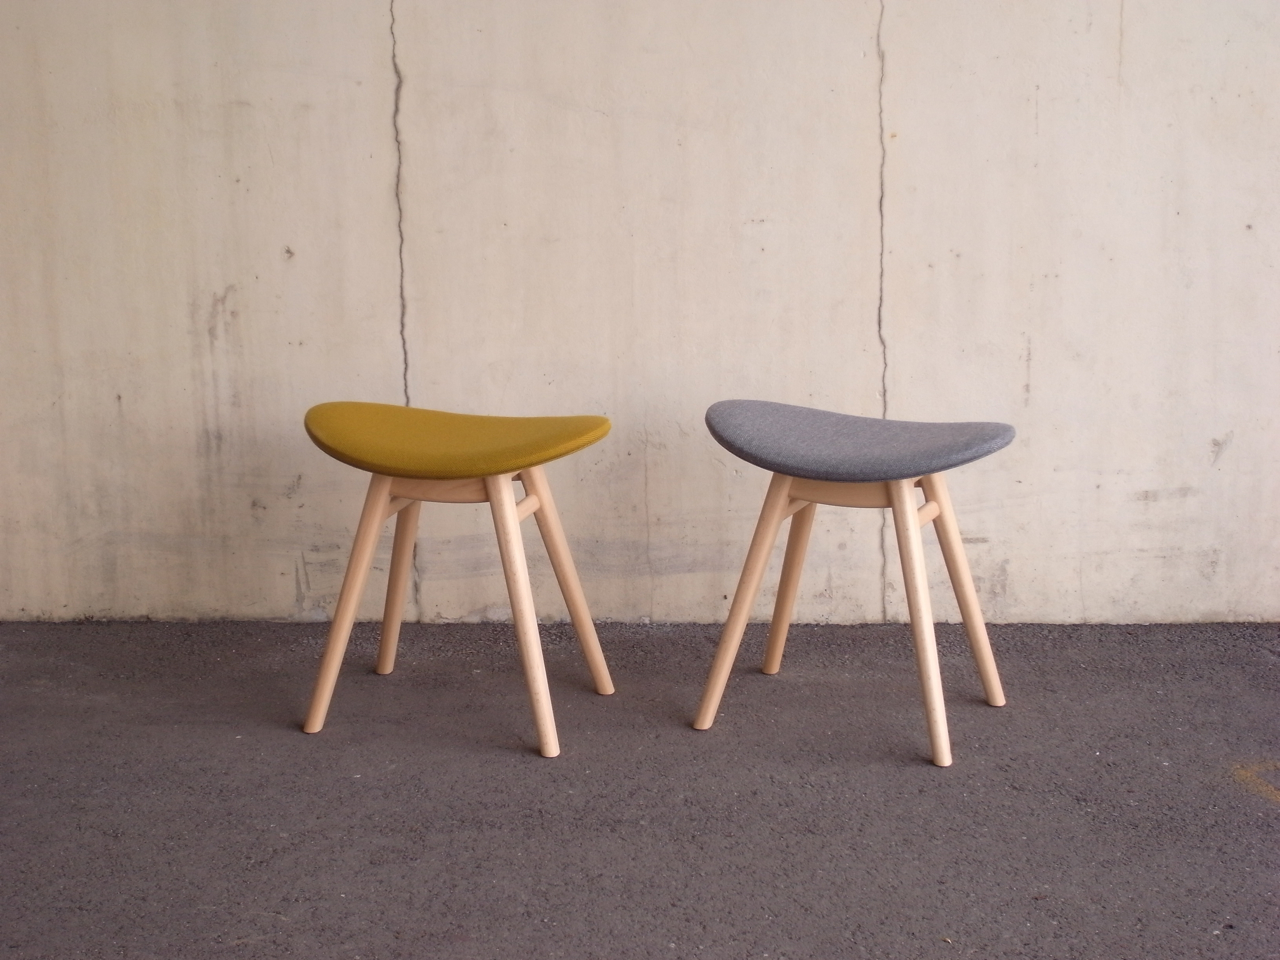 nmd-01 (nomade stool)             w :  475 mm             d :  340 mm             h :  475 mm            sh : 425 mm   material :　beech , fabric       finish : oil       price : ¥ 42,000 (with tax) （価格はbeech×fabricのものです）